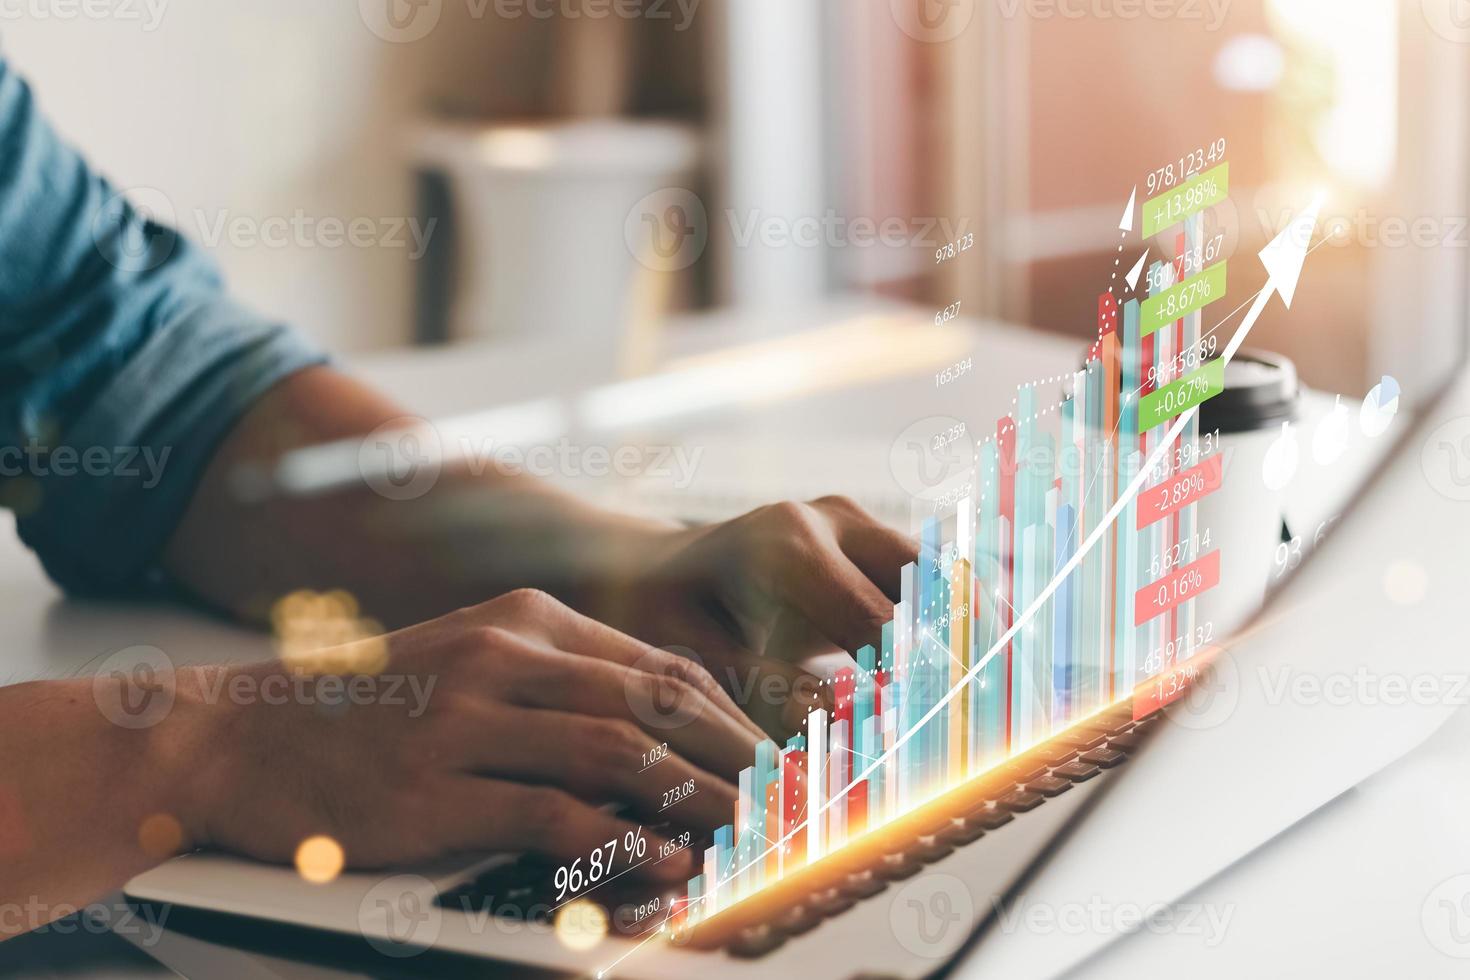 Business people analyze financial data chart trading forex, Investing in stock markets, funds and digital assets, Business finance technology and investment concept, Business finance background. photo